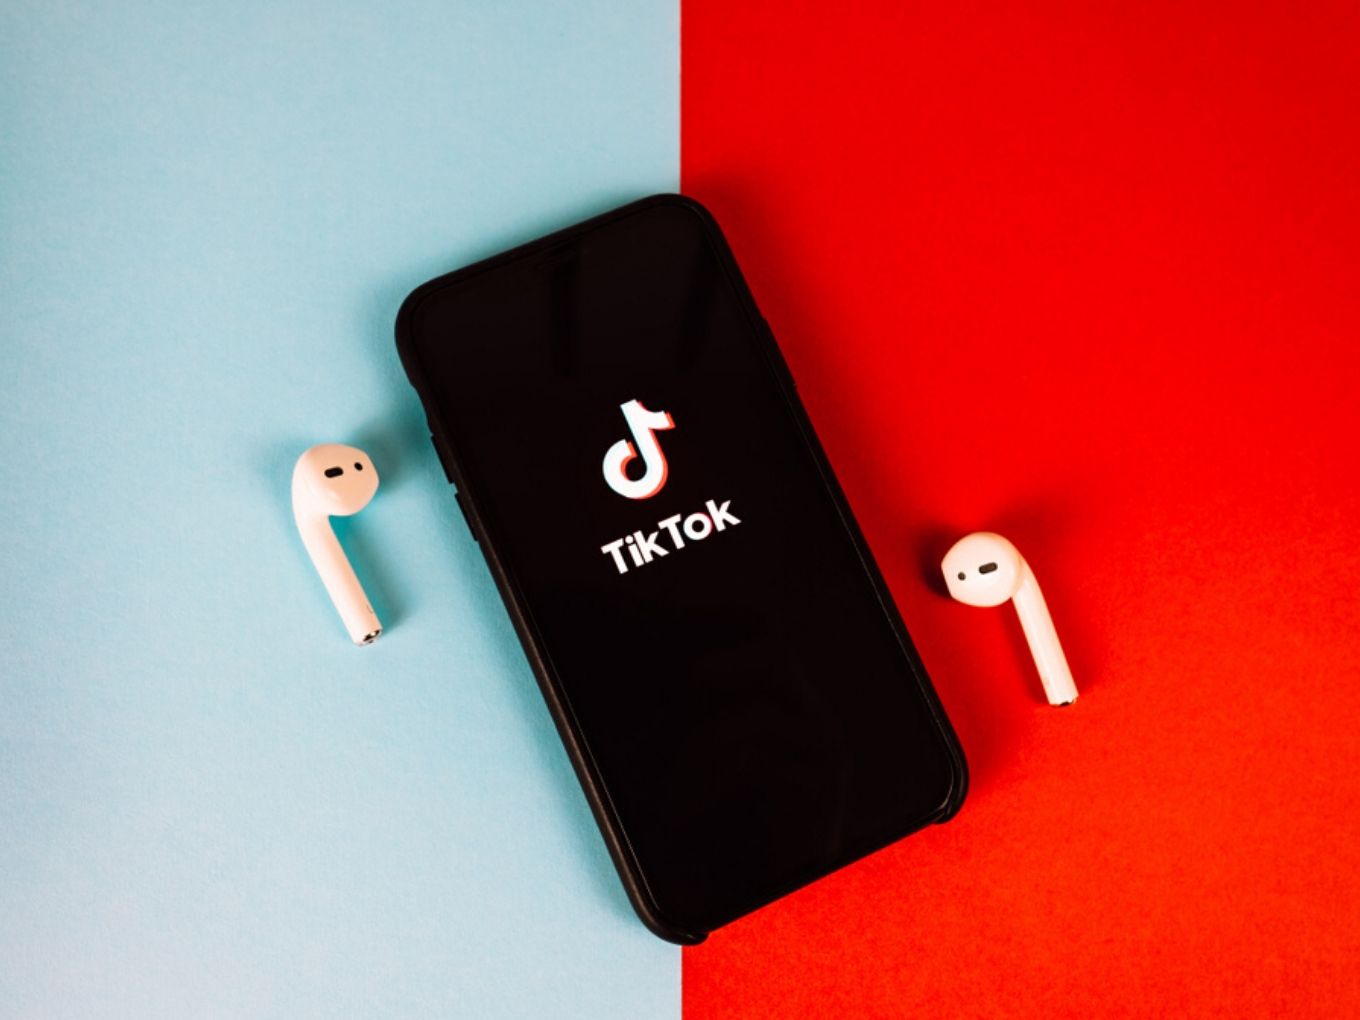 After India Ban, Time Running Out For TikTok In US, Hong Kong